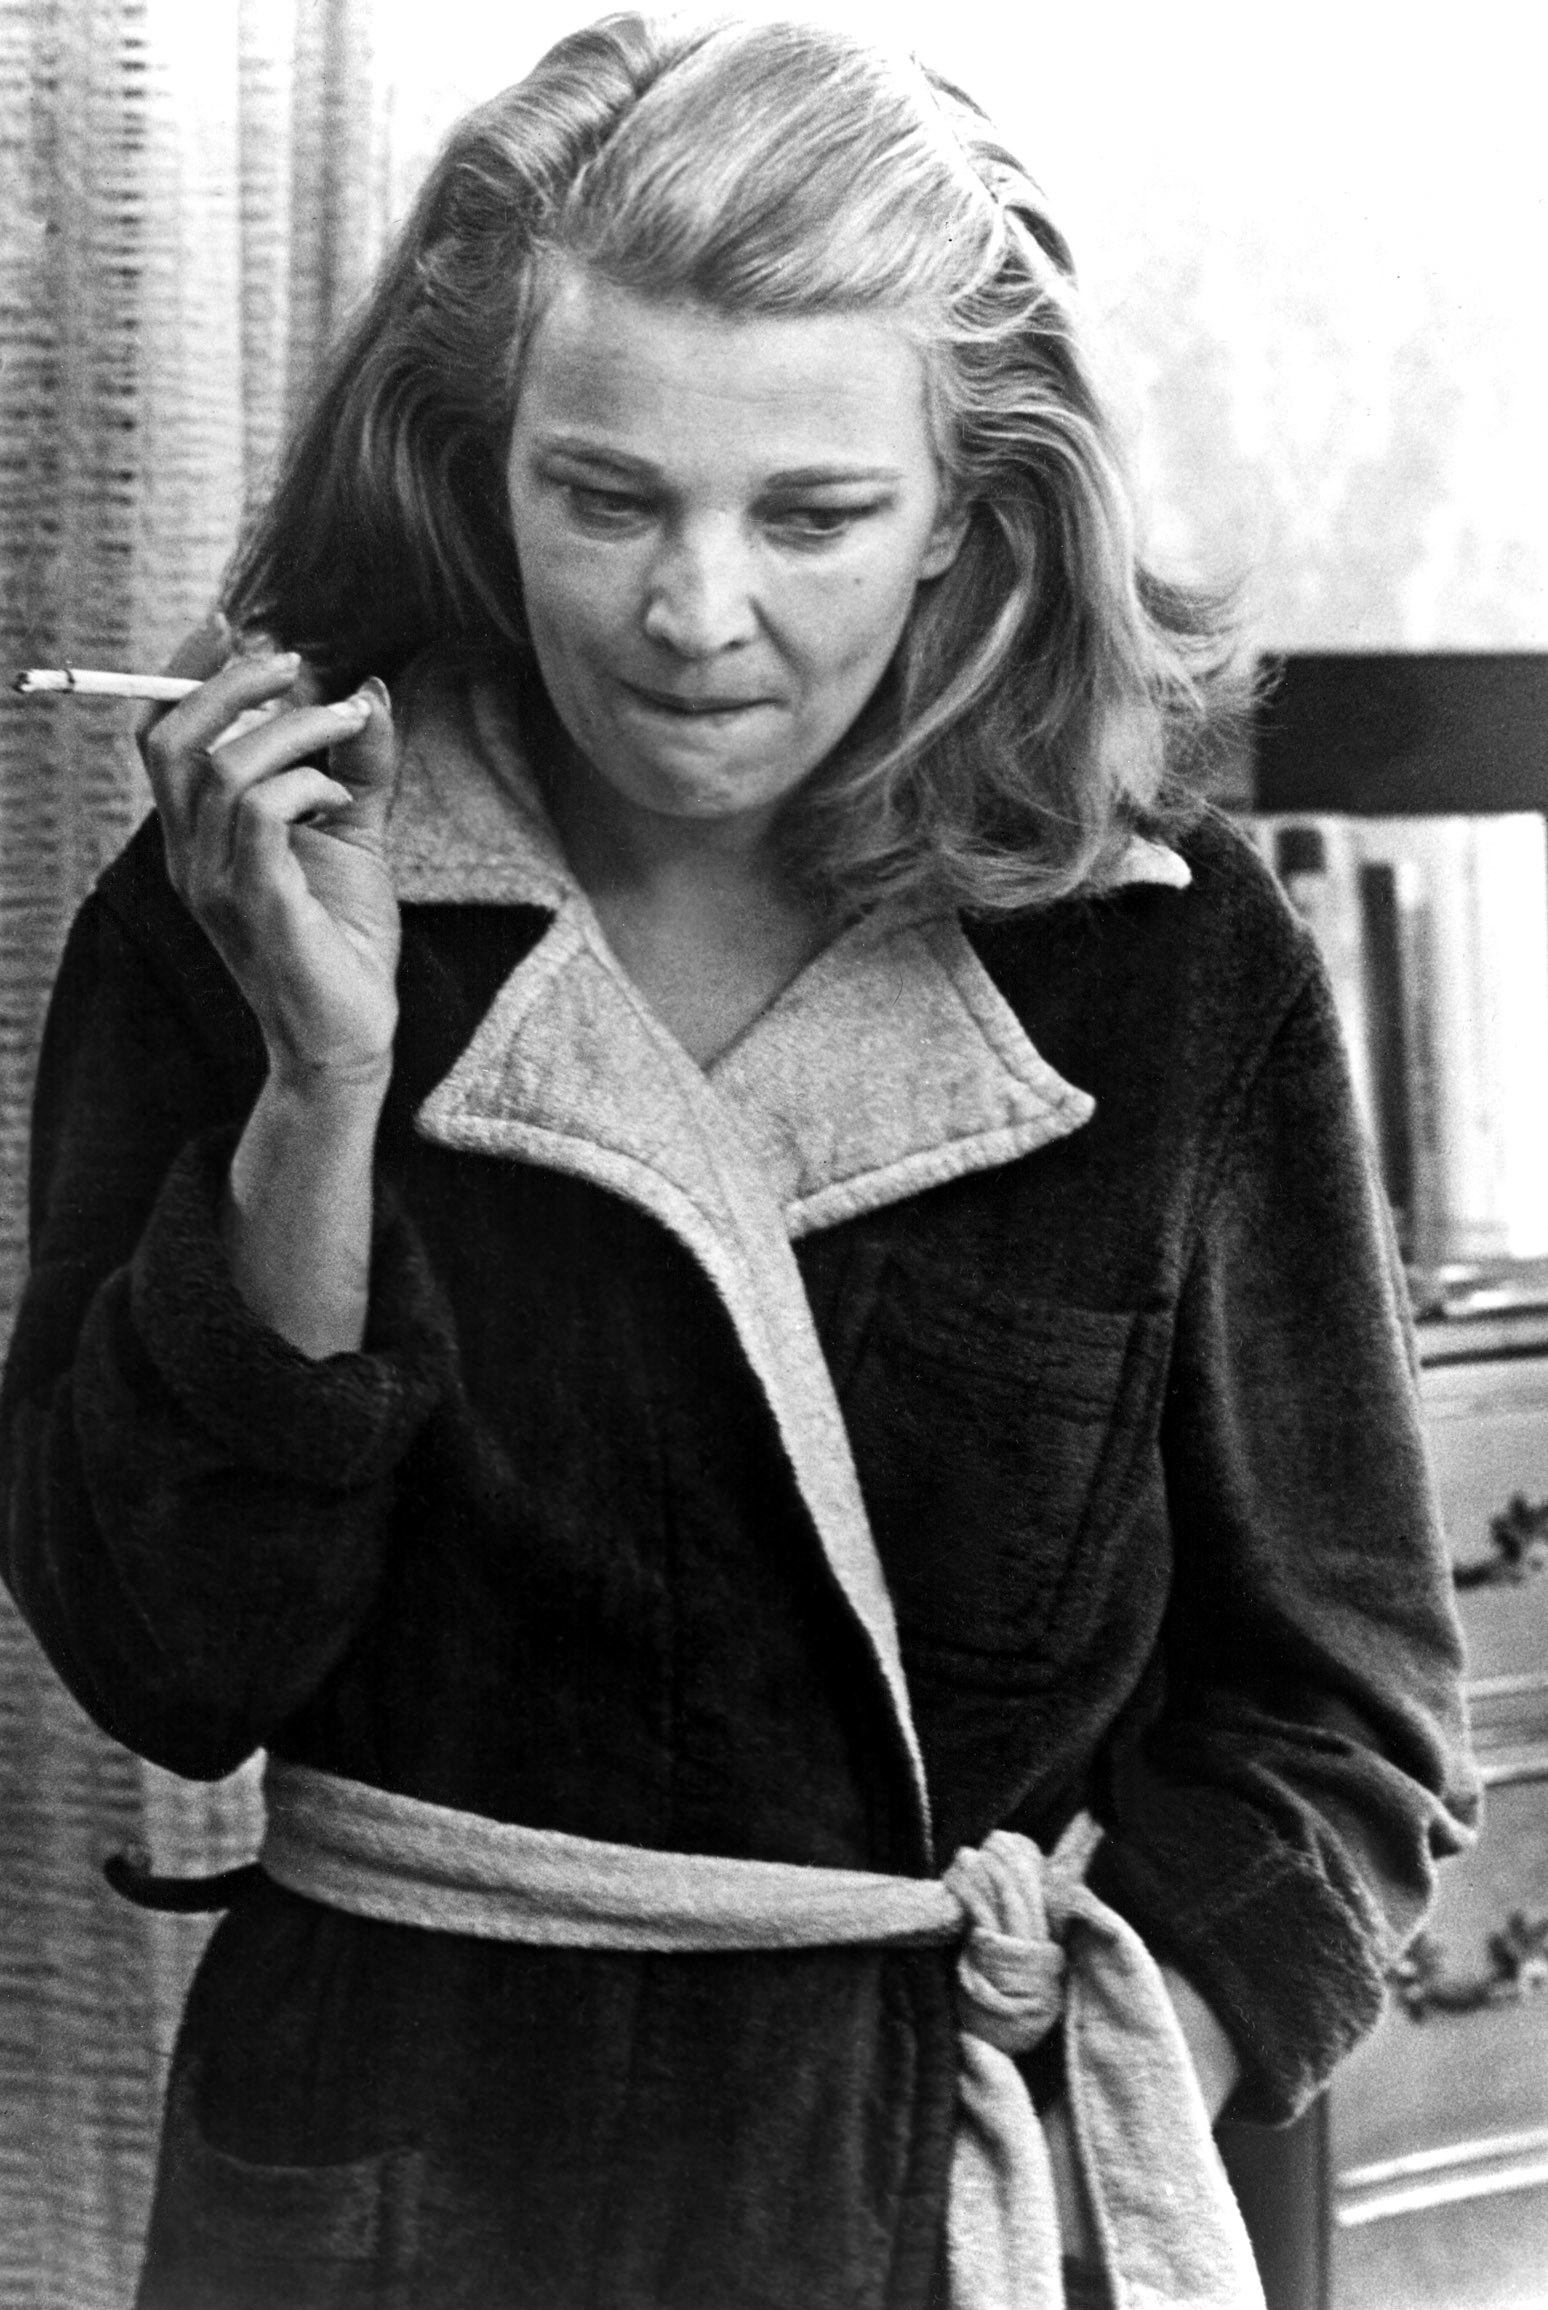 Gena Rowlands smoking a cigarette in the film